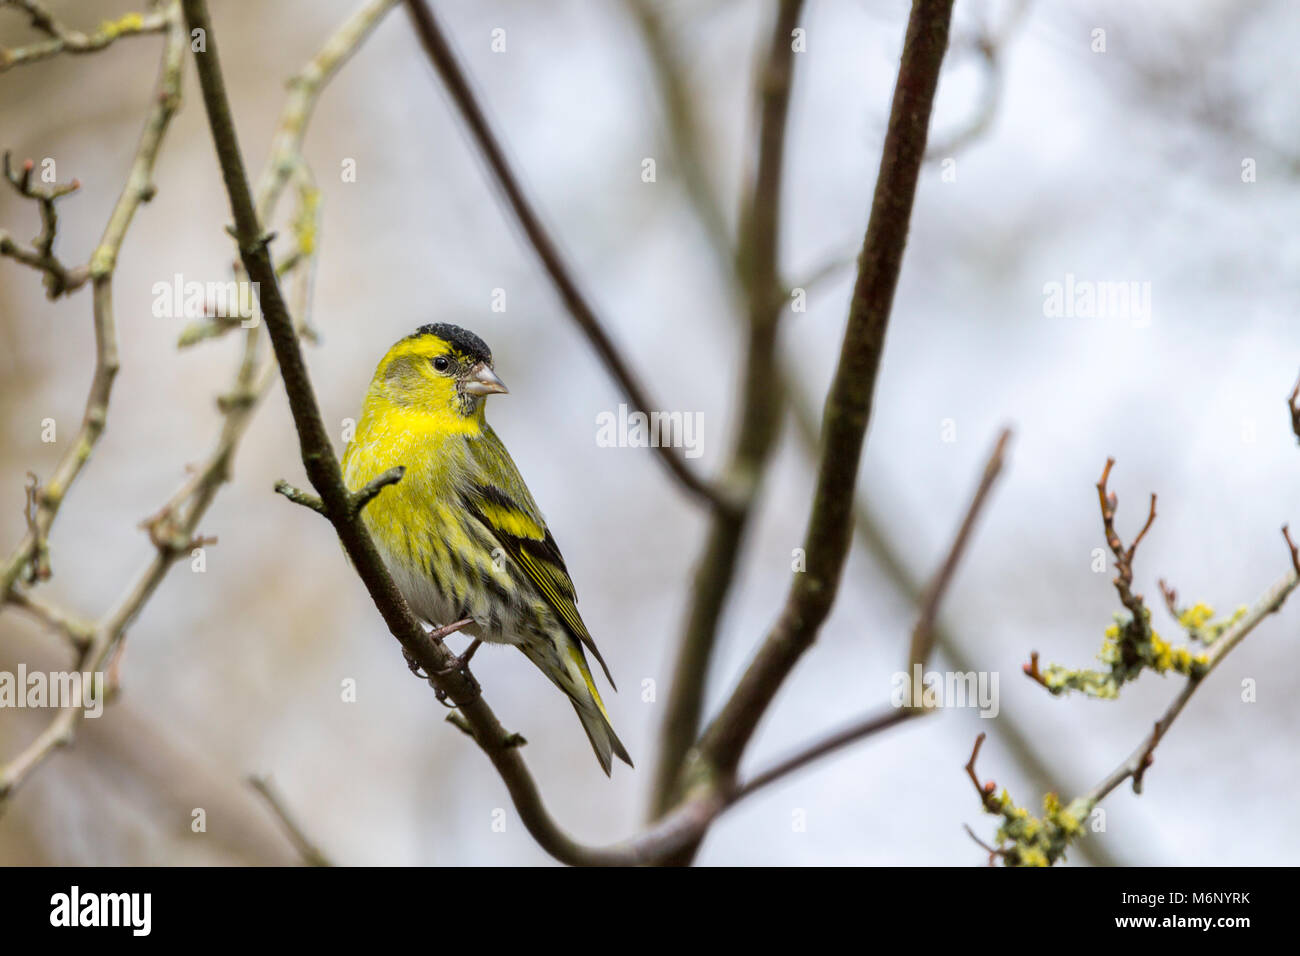 Siskin (Carduelis spinus) a small lively finch with forked tail and streaky yellow green body and long narrow bill. Male has blackish crown and bib. Stock Photo